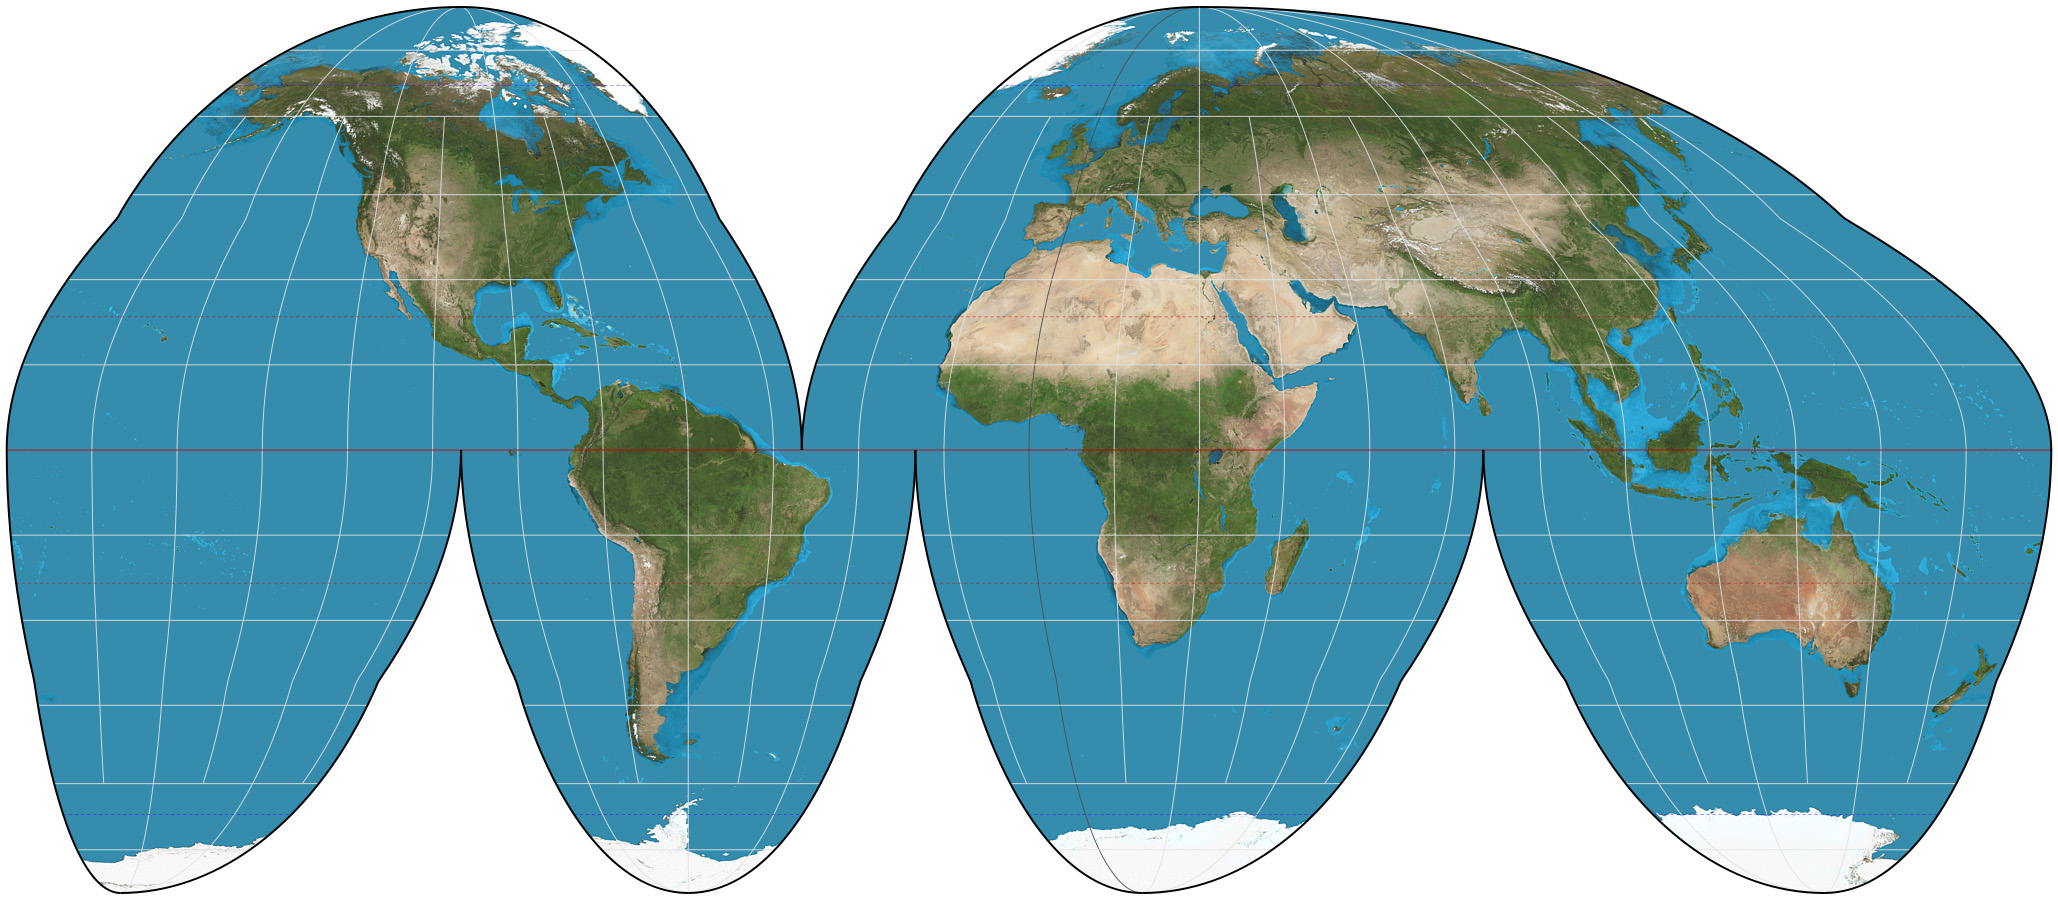 What is the most realistic earth map?